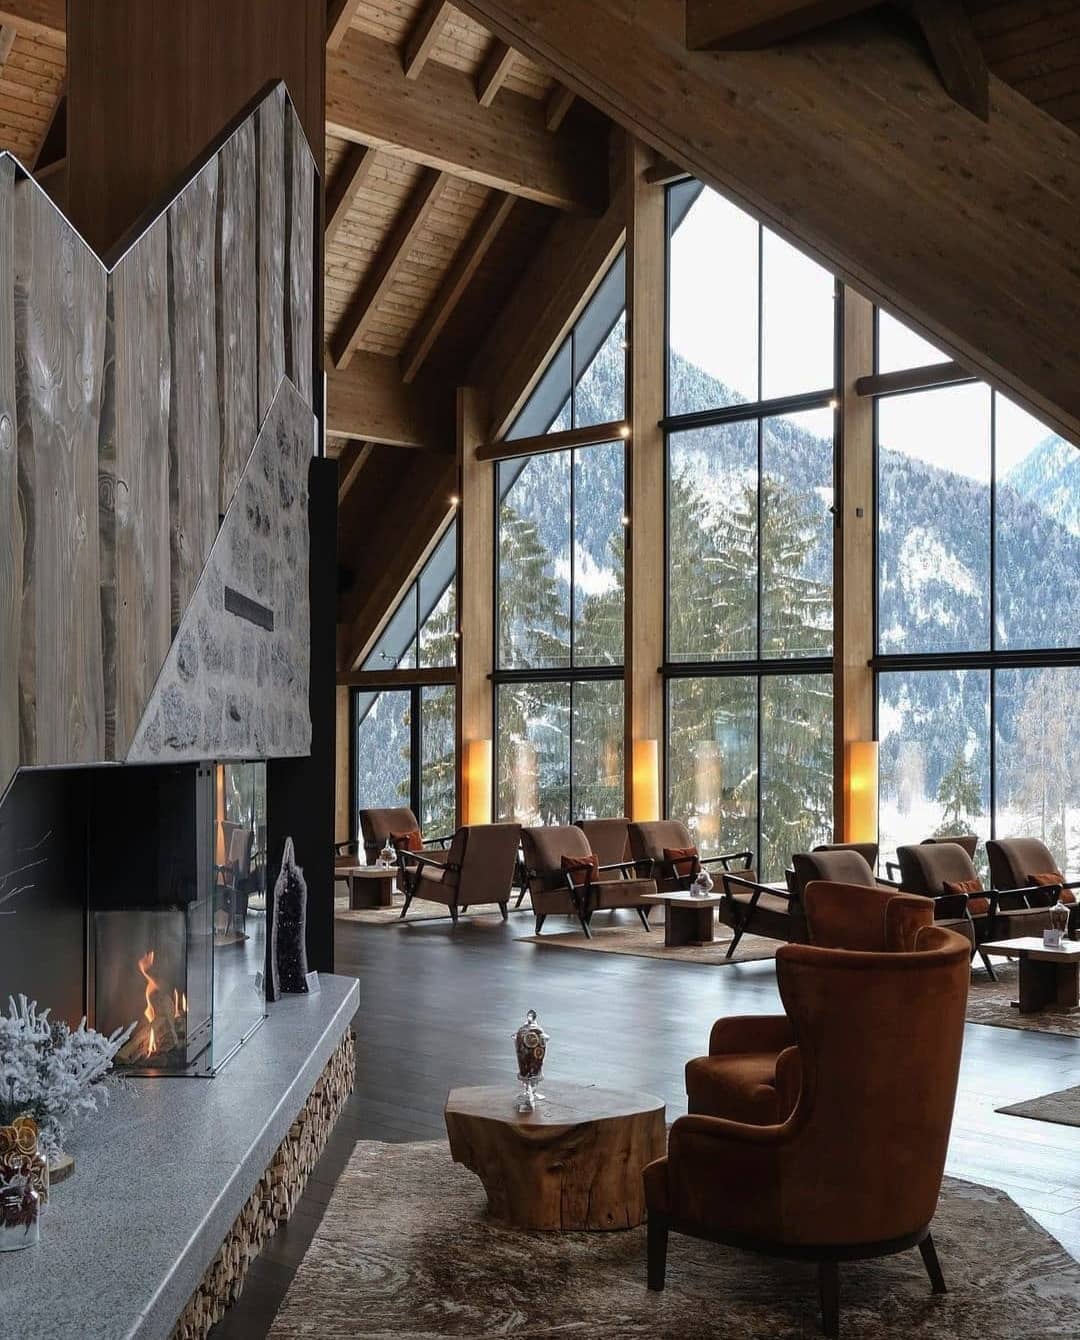 Hotel lobby with a view of the Italian Alps in Pinzolo, Trentino, northern Italy